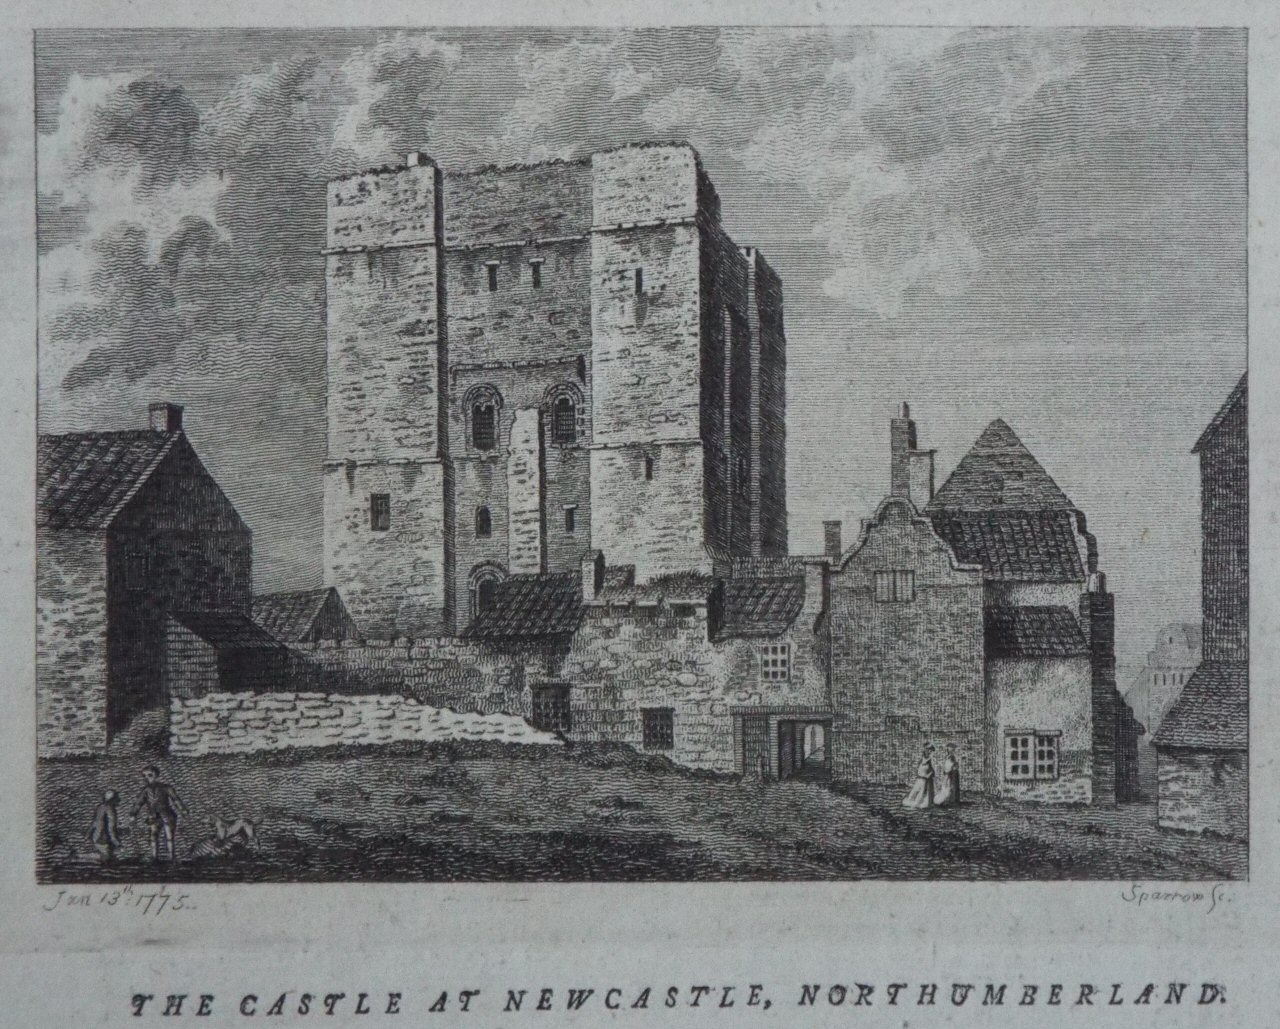 Print - The Castle at Newcastle, Northumberland. - 